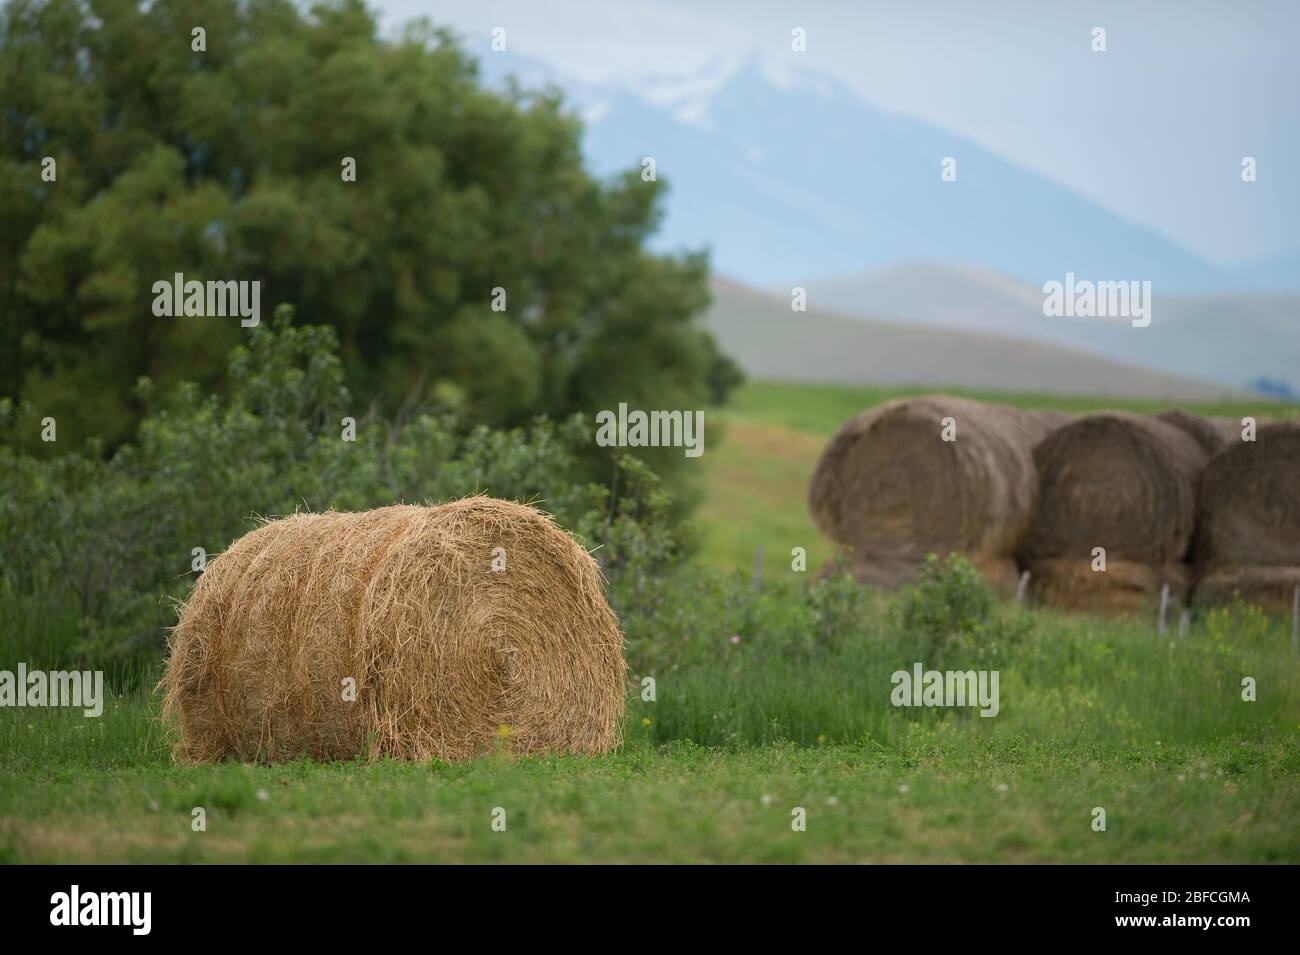 Round bale of hay freshly cut with other older large round bales in background economical way to feed livestock with less labor Stock Photo